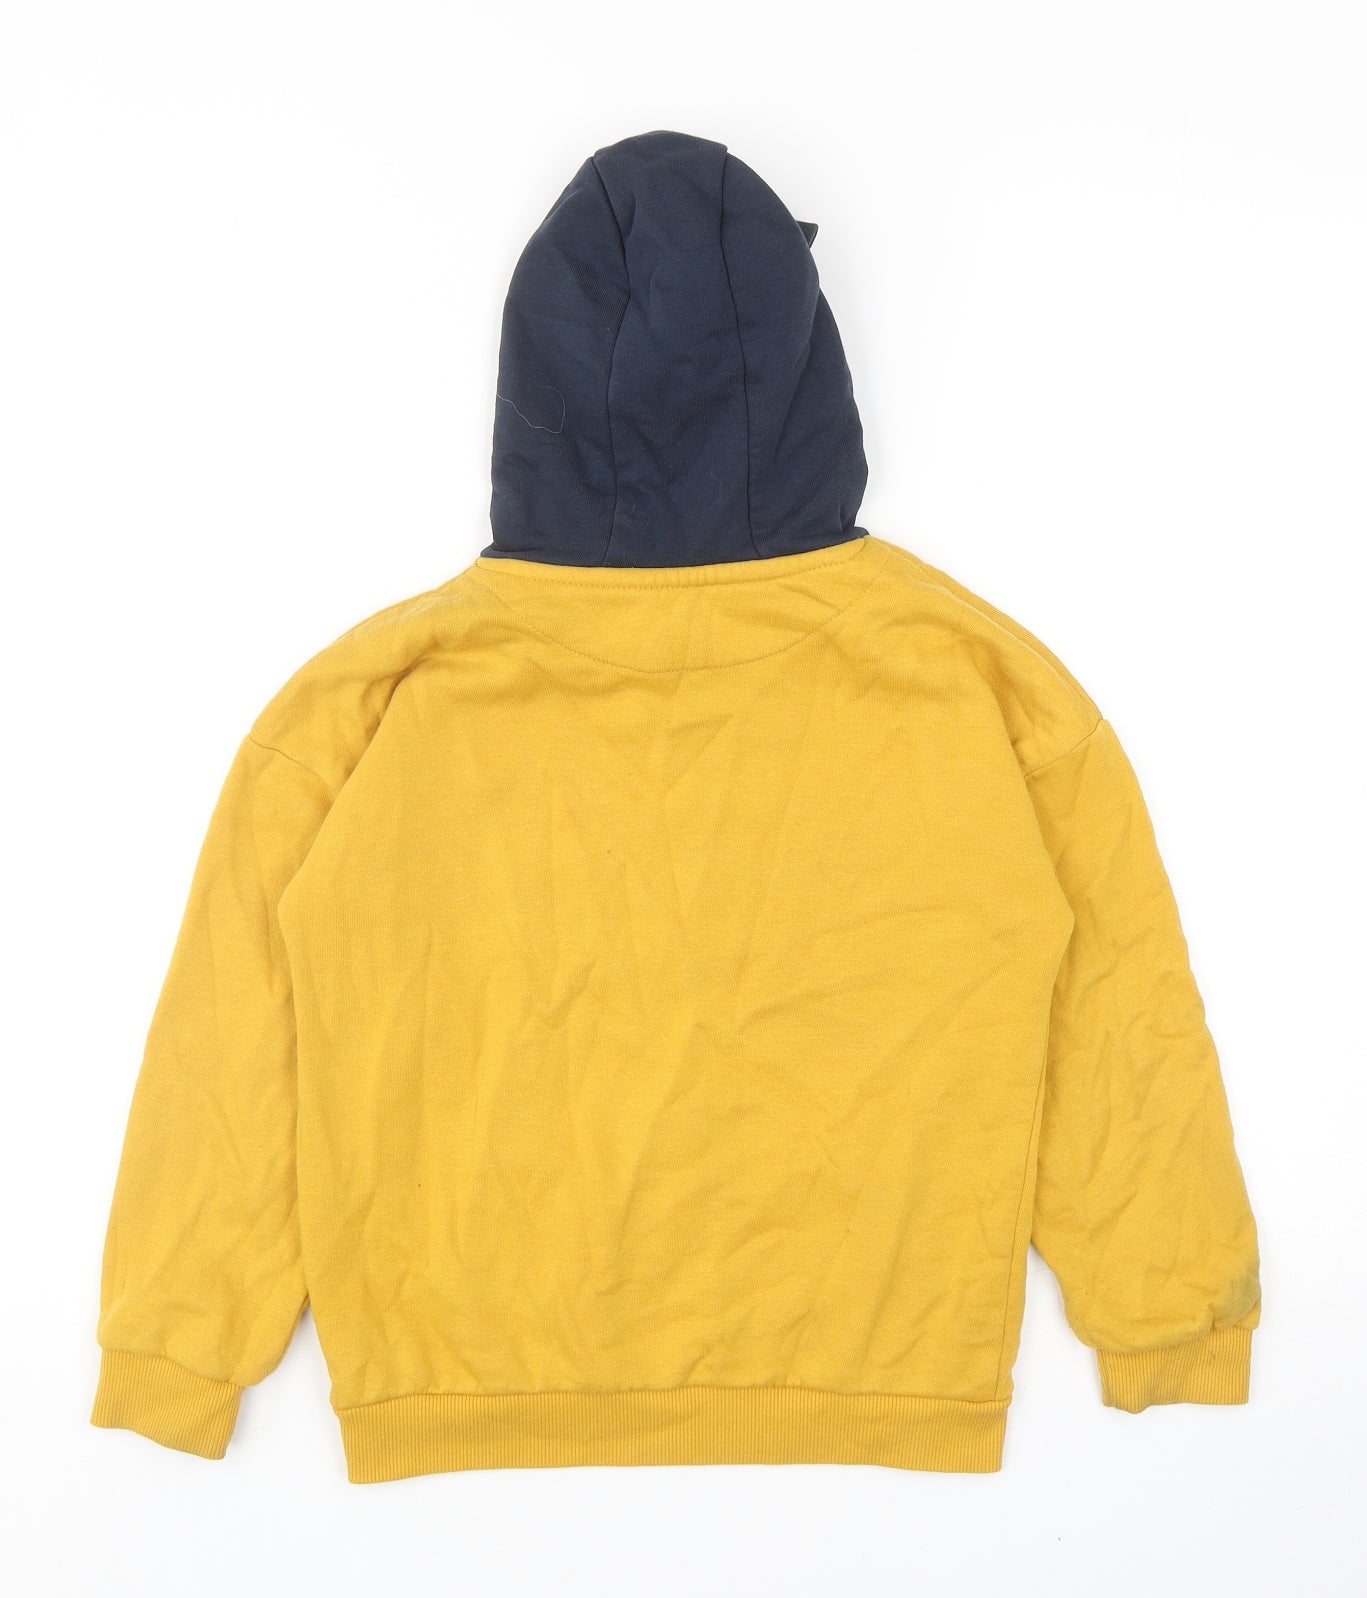 Primark Boys Yellow Polyester Pullover Hoodie Size 7-8 Years Pullover - Explore slogan